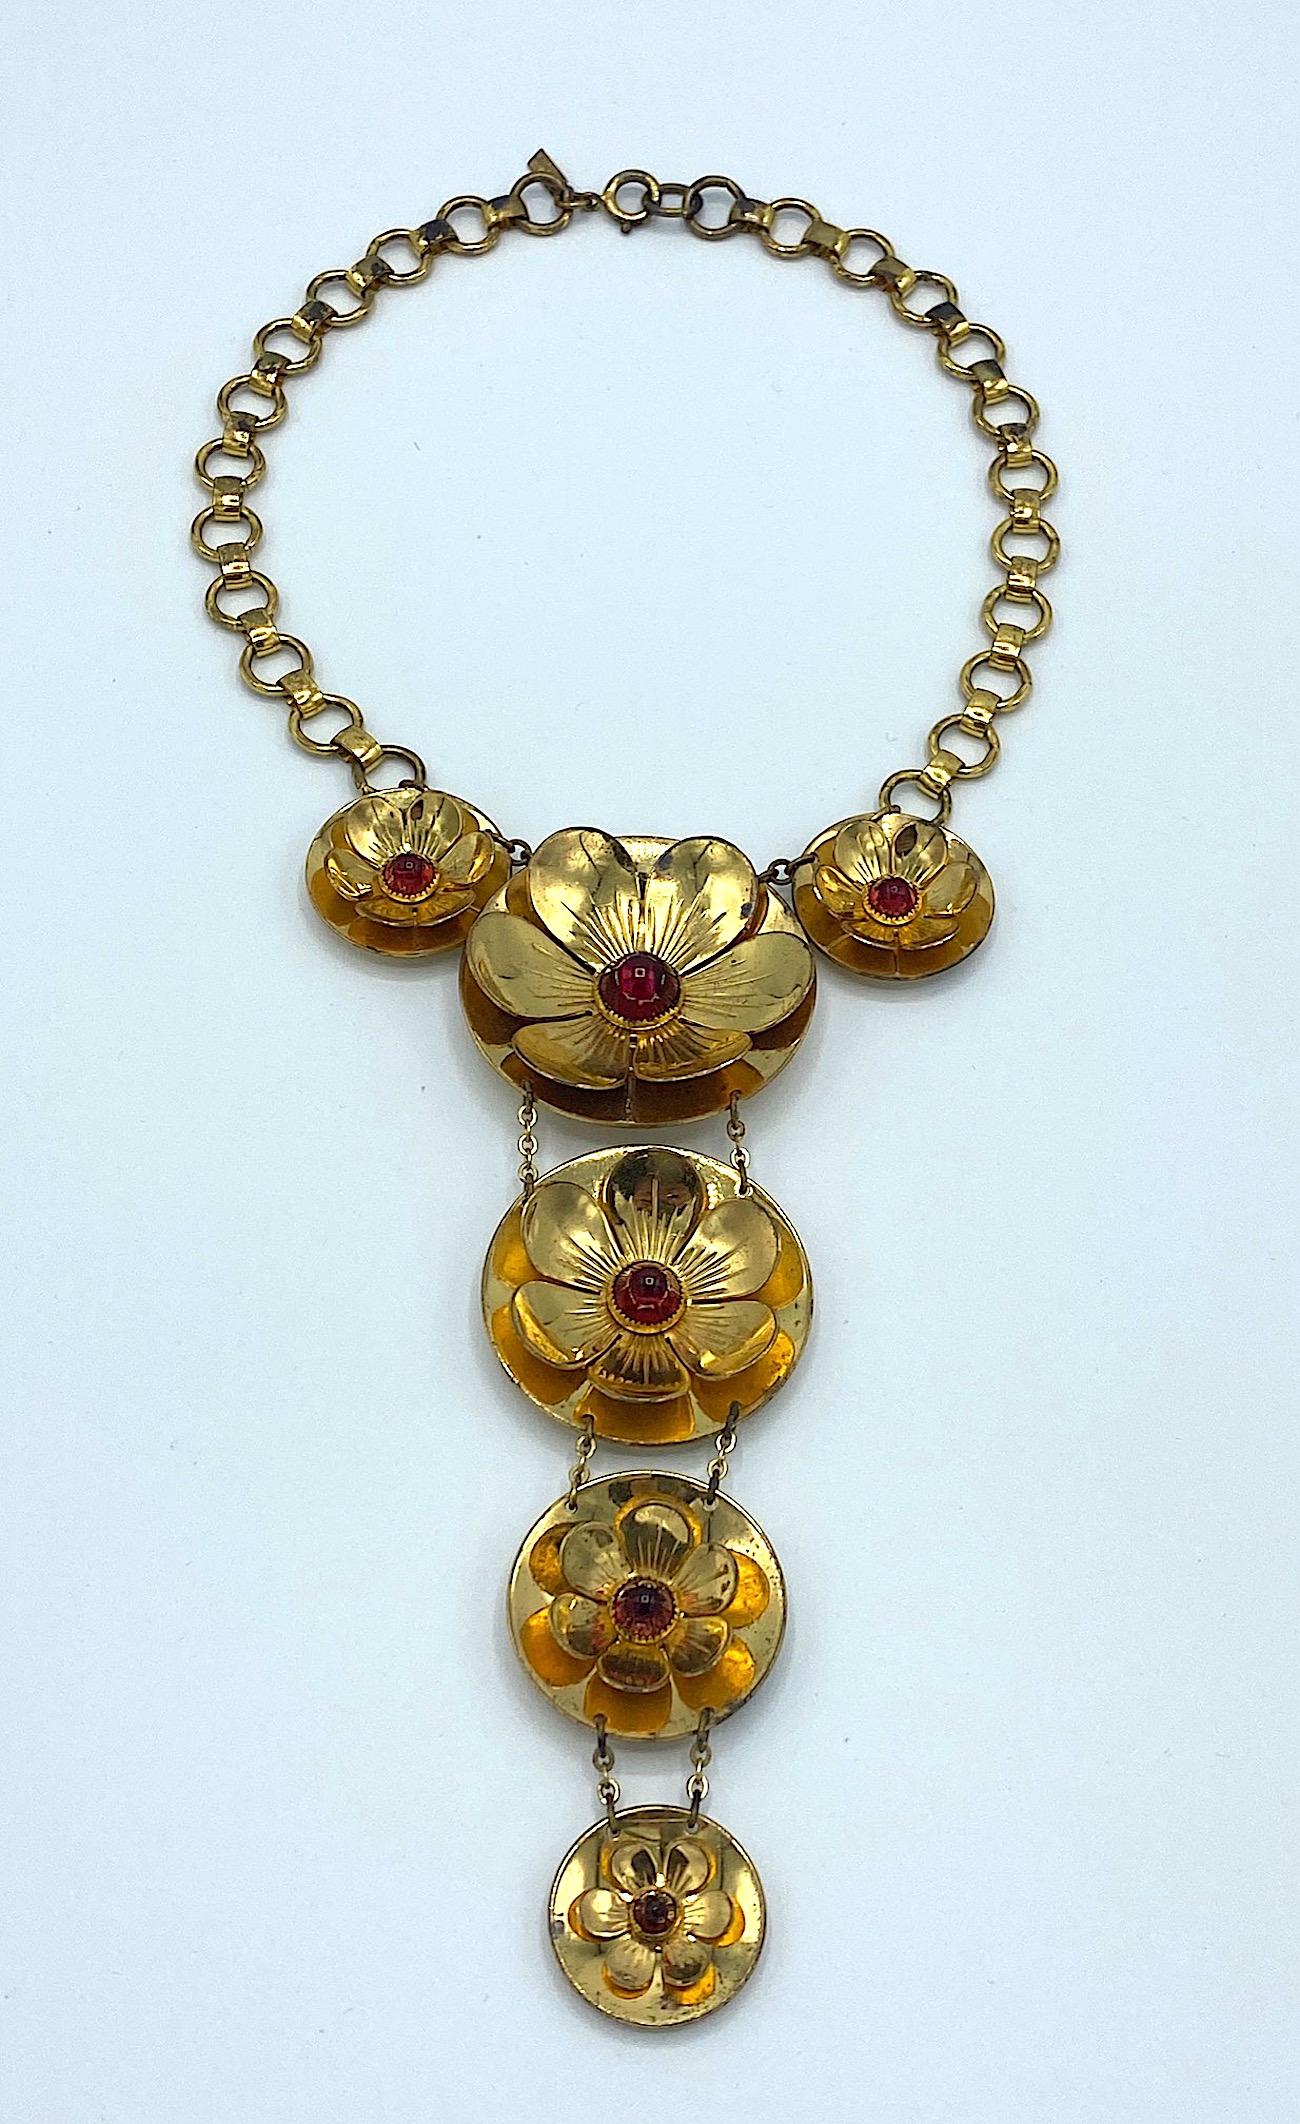 A lovely and very early necklace by US fashion jewelry company Monet Jewelers. Today, the 100 year old company is simply nows as Monet. This necklace is rare and true collector's piece dating from the late 1930s to early 1940s. The necklace features